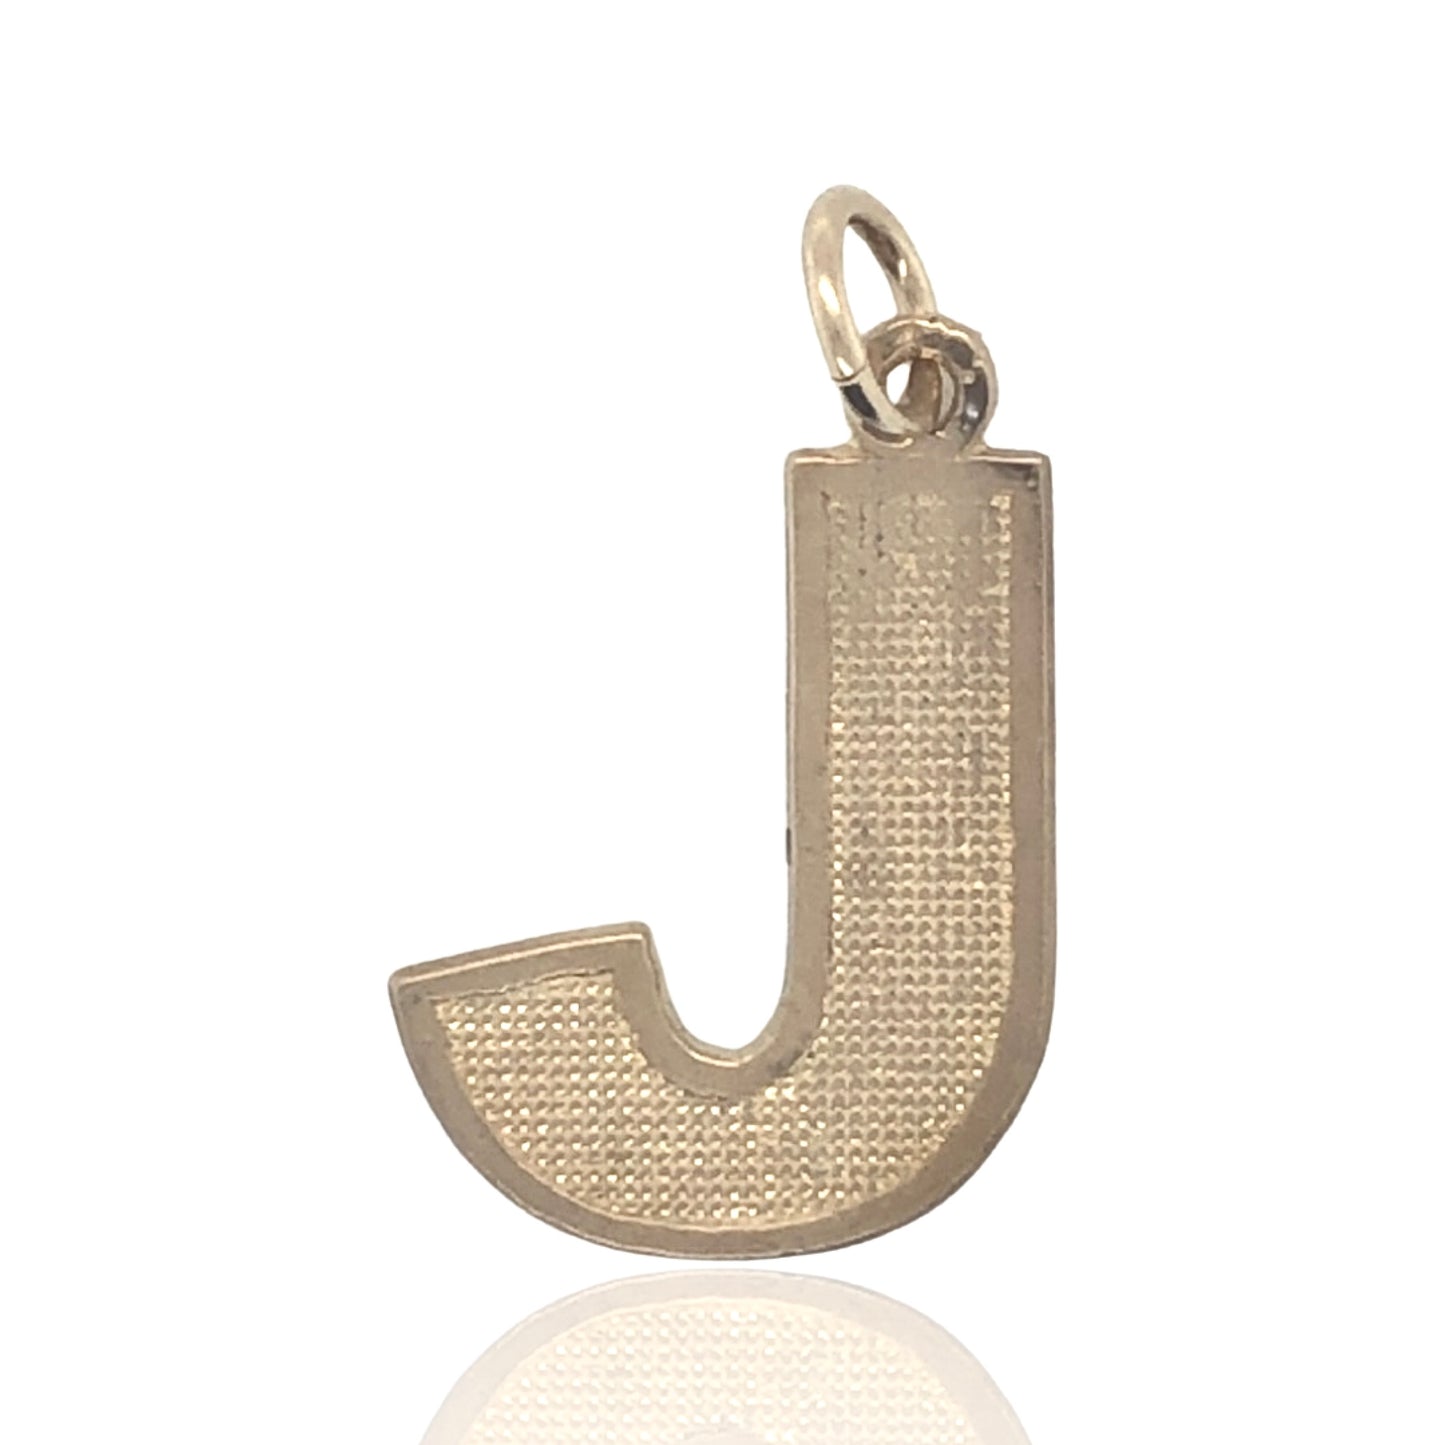 10K yellow gold bold style Initial letter "J"